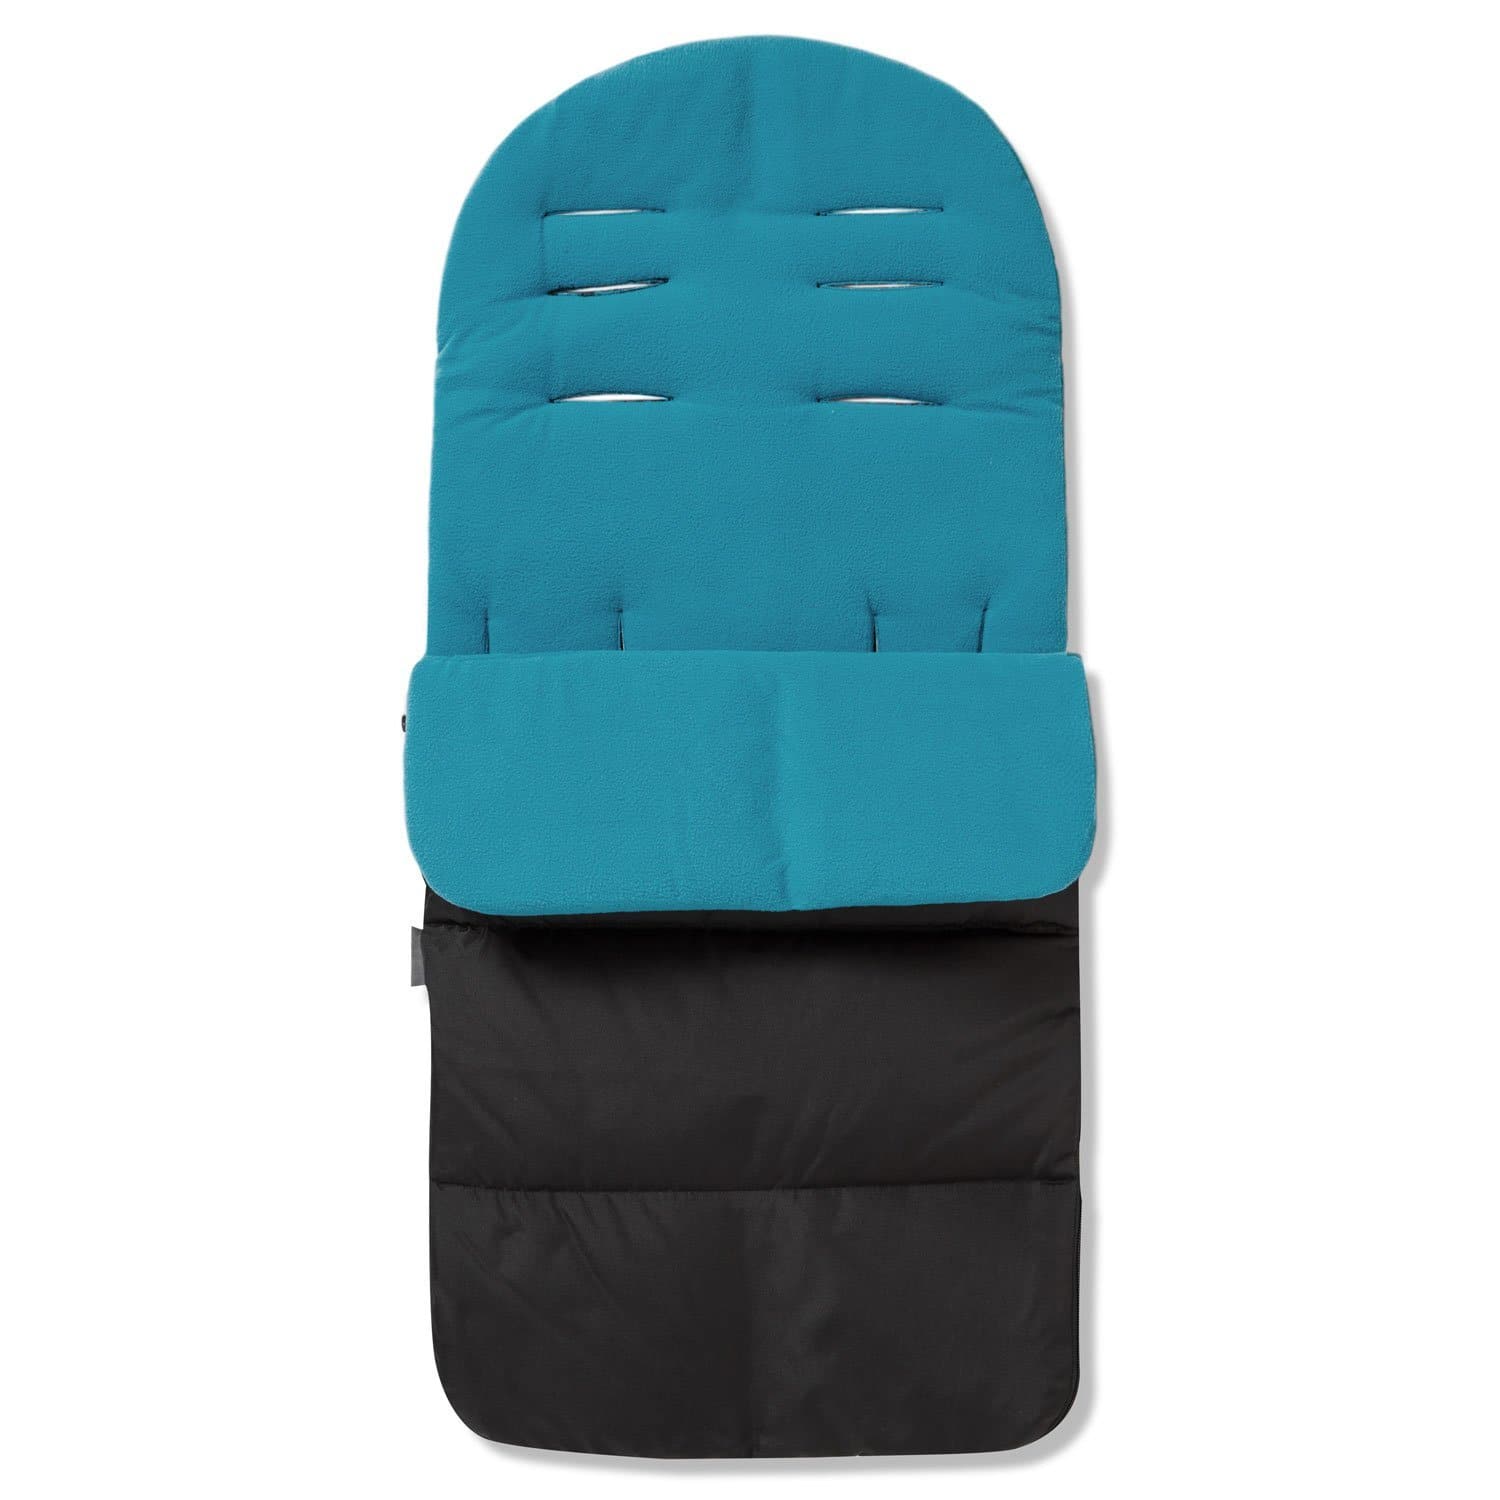 Premium Footmuff / Cosy Toes Compatible with Uppababy - Ocean Blue / Fits All Models | For Your Little One